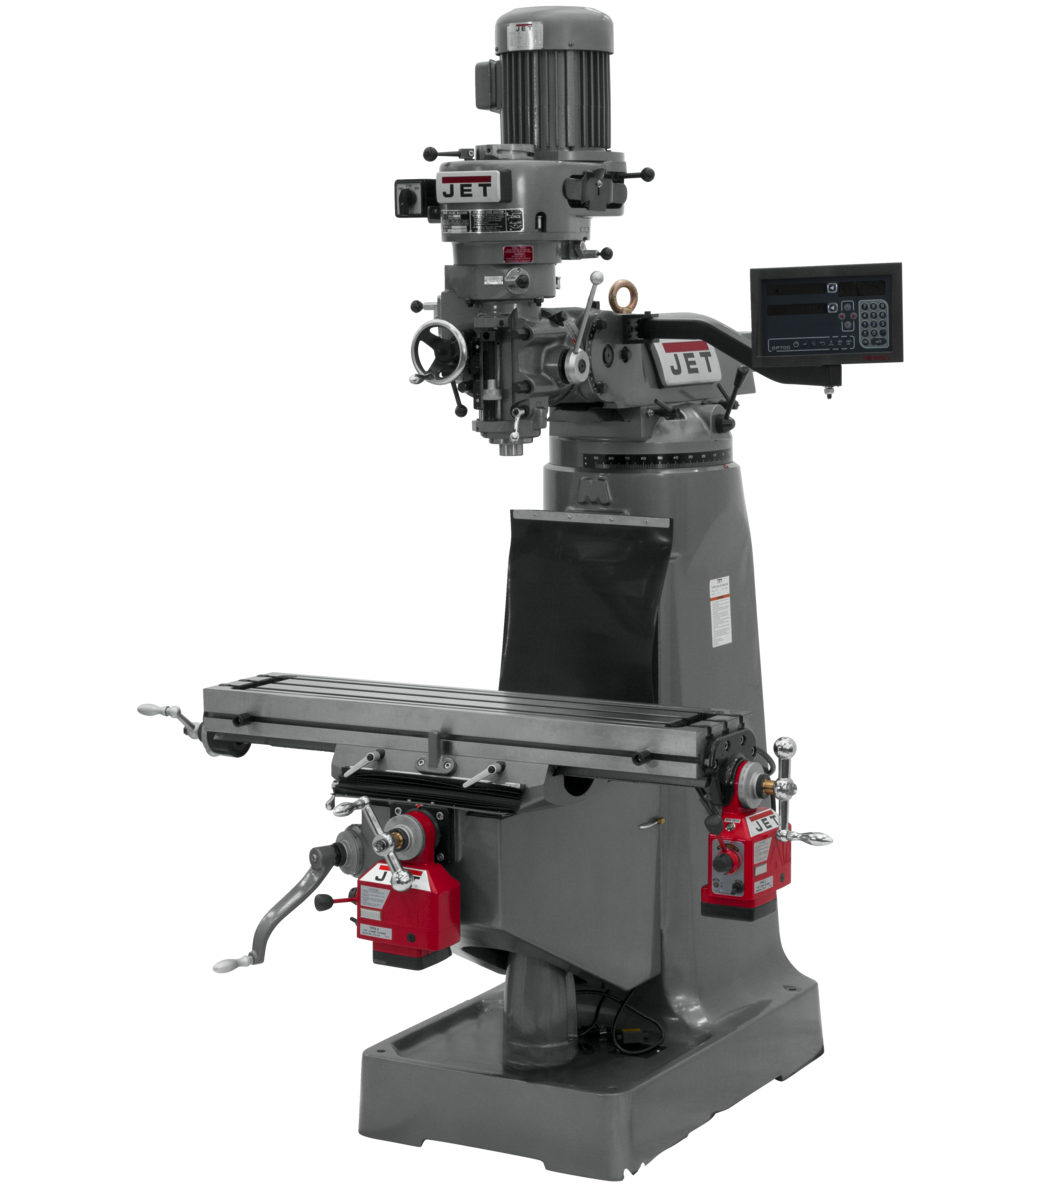 JTM-2 Mill With 3-Axis Newall DP700 DRO (Quill) With X and Y-Axis Powerfeeds